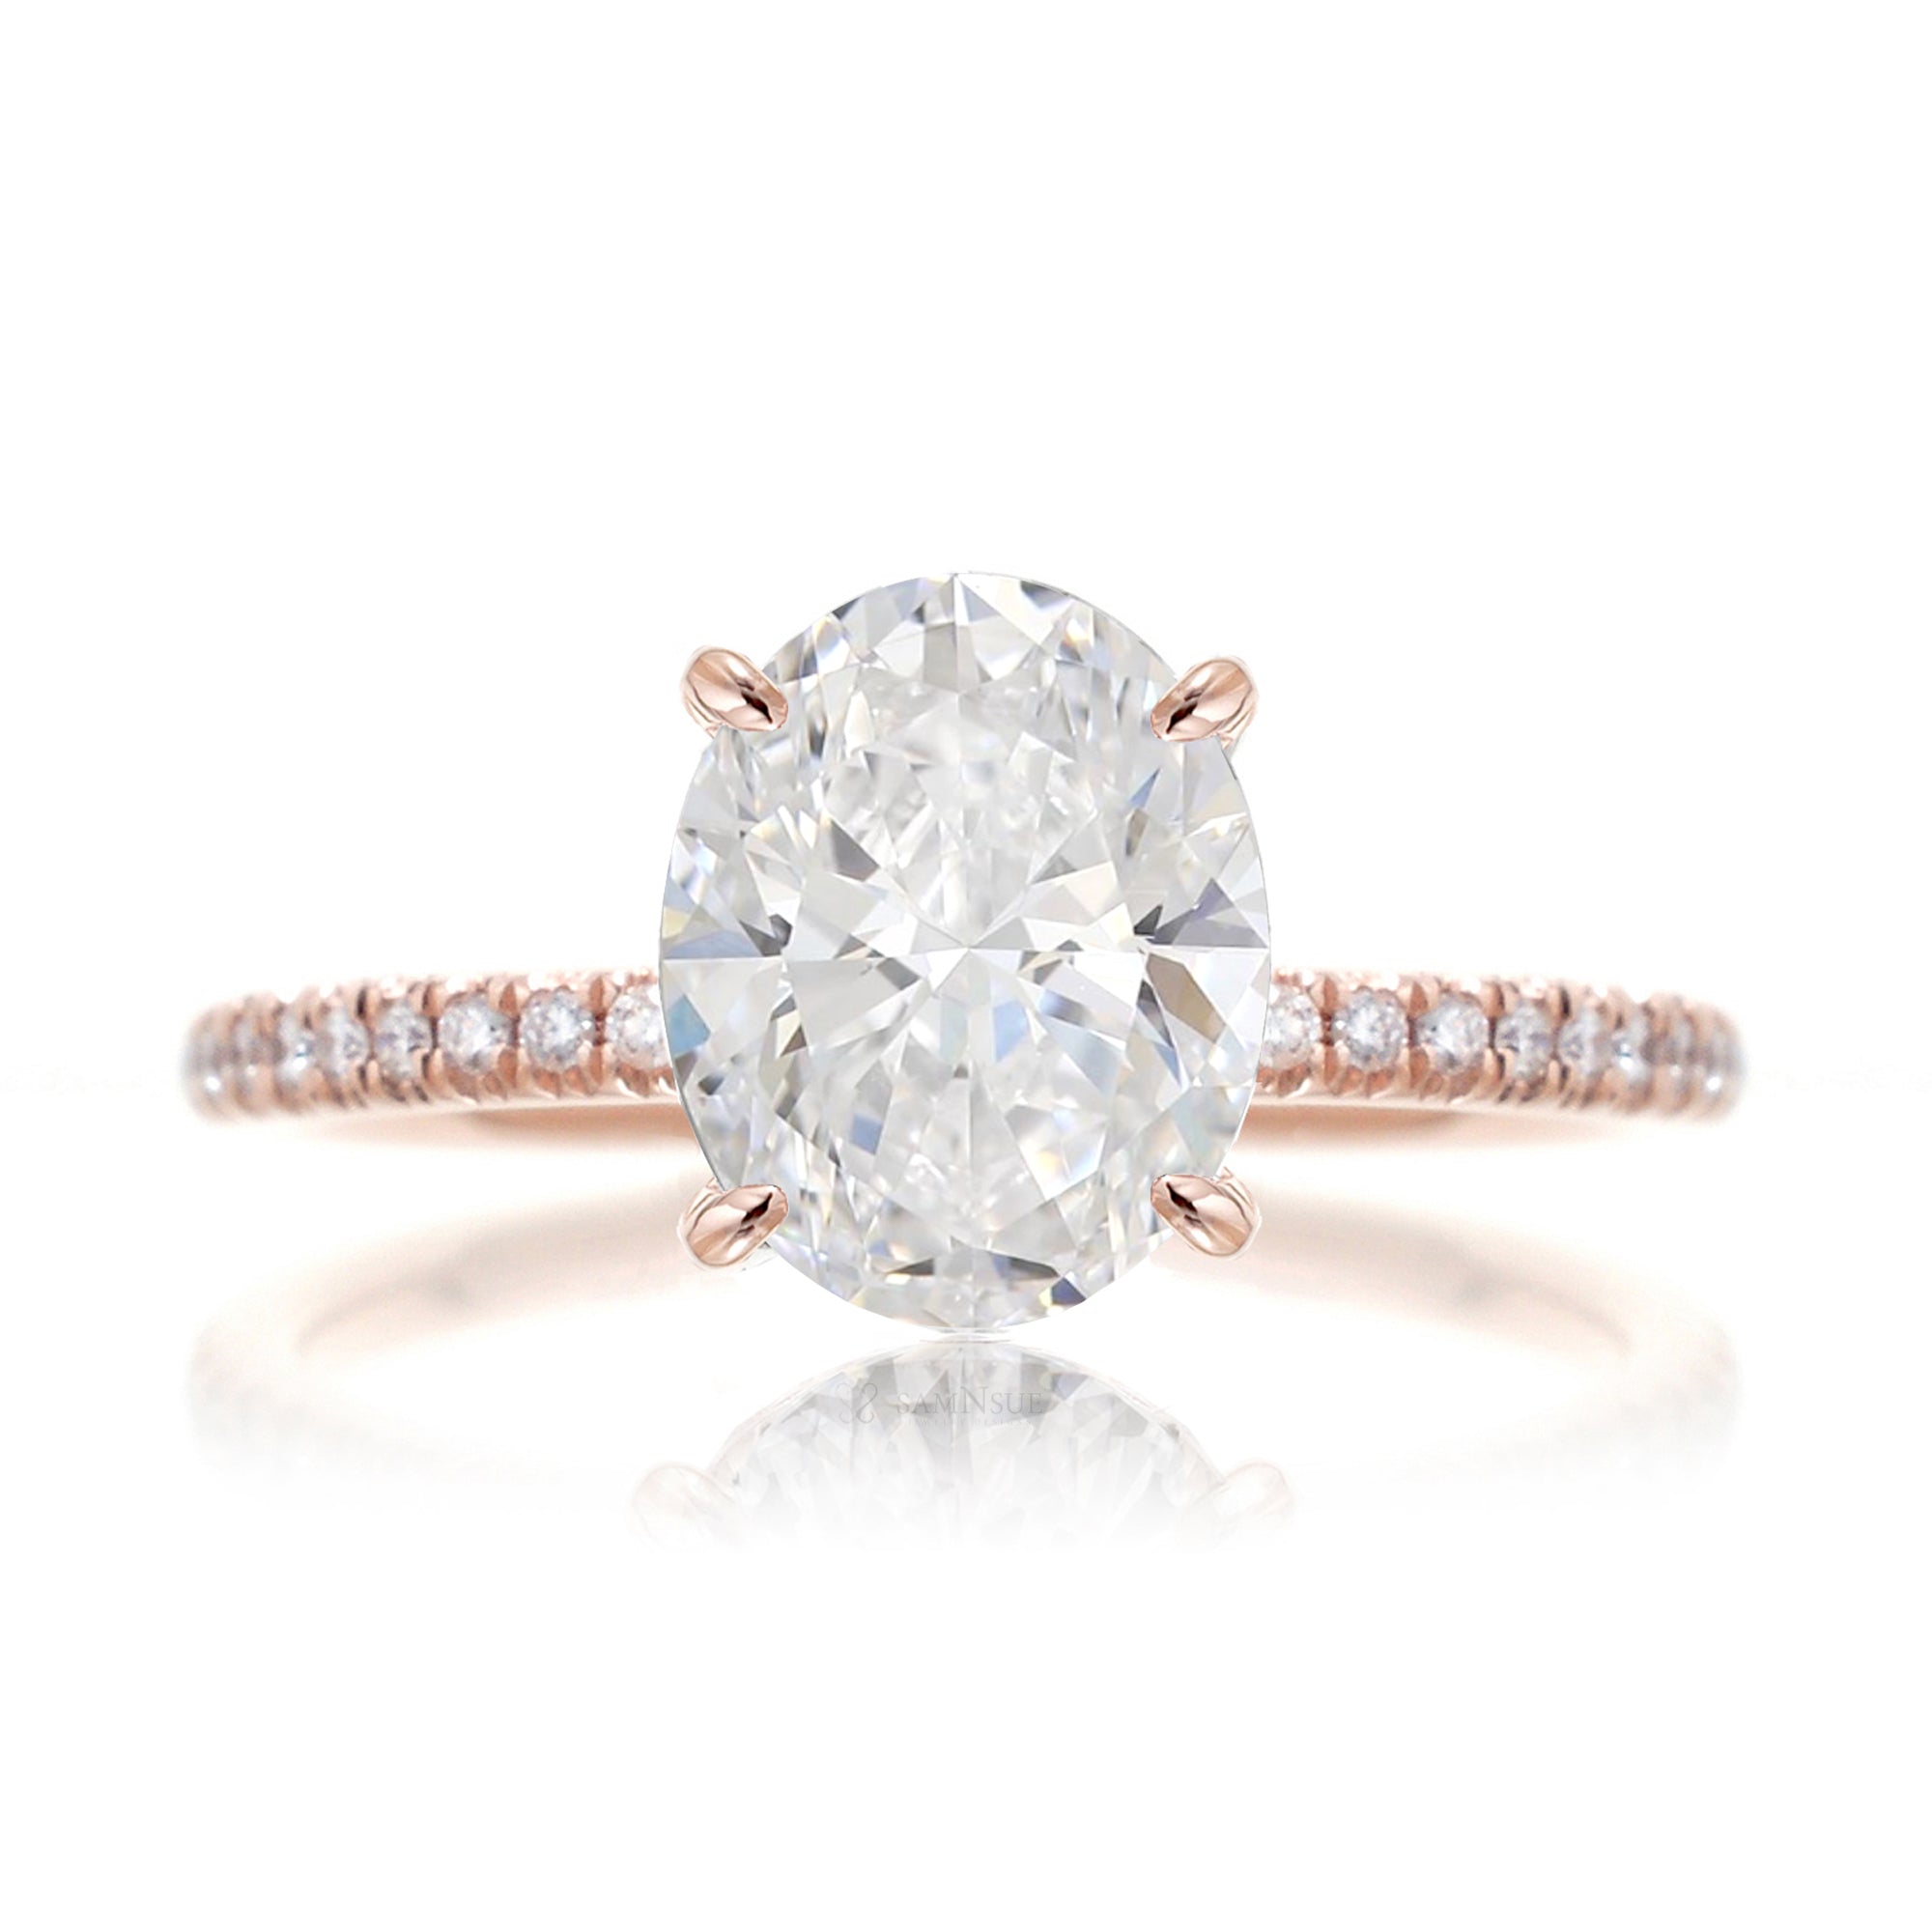 Oval cut lab-grown diamond engagement ring rose gold - The Ava